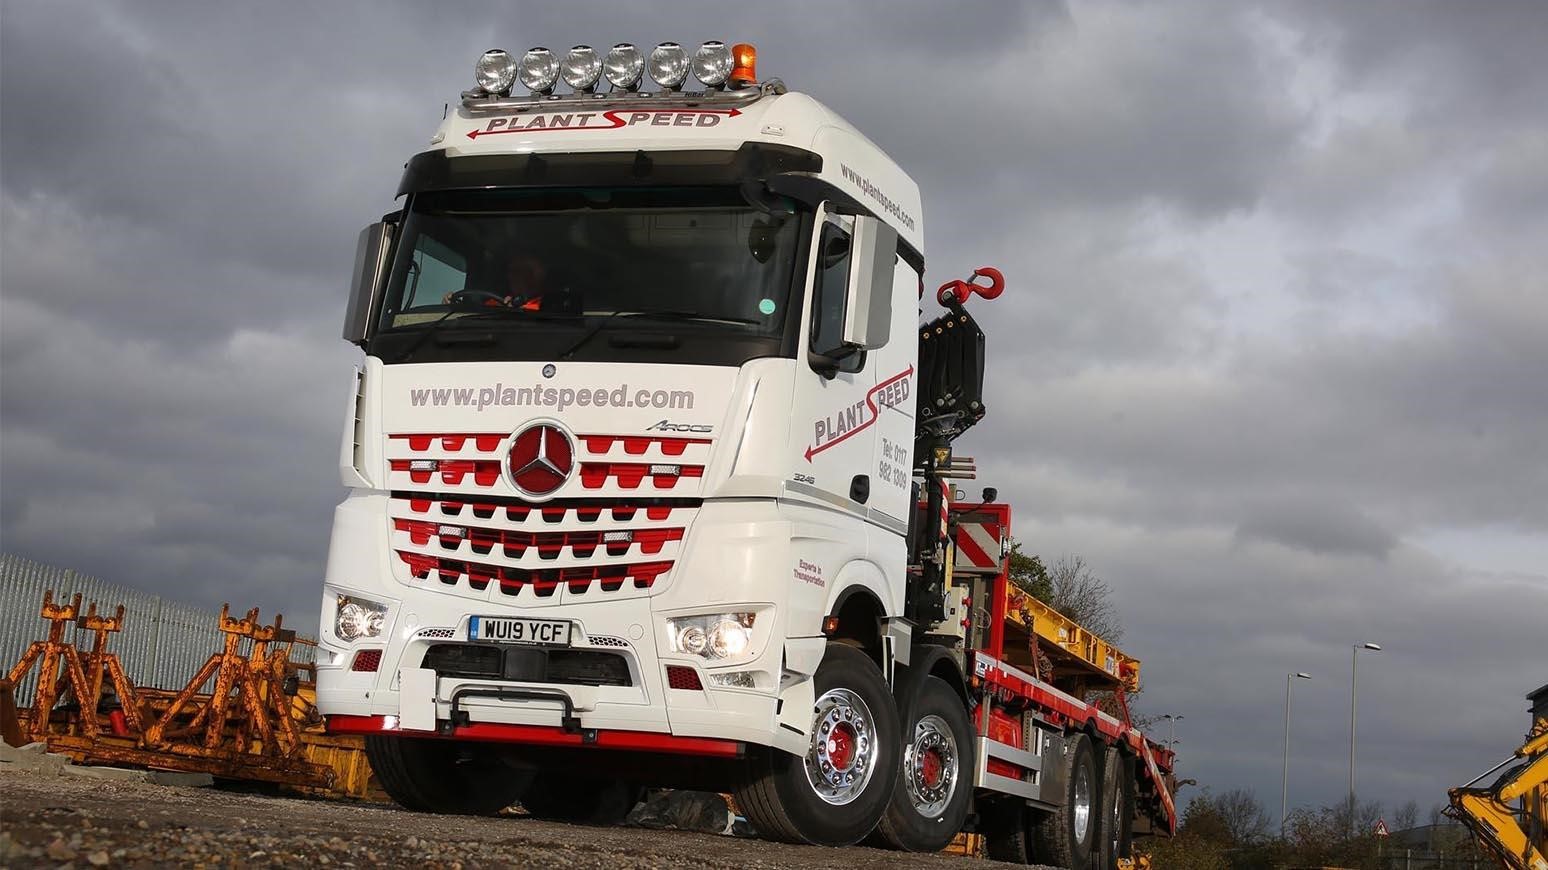 Bristol-Based Plant Speed Continues Mercedes-Benz Shopping Spree With New 32-Tonne Arocs 3246 Rigid Truck